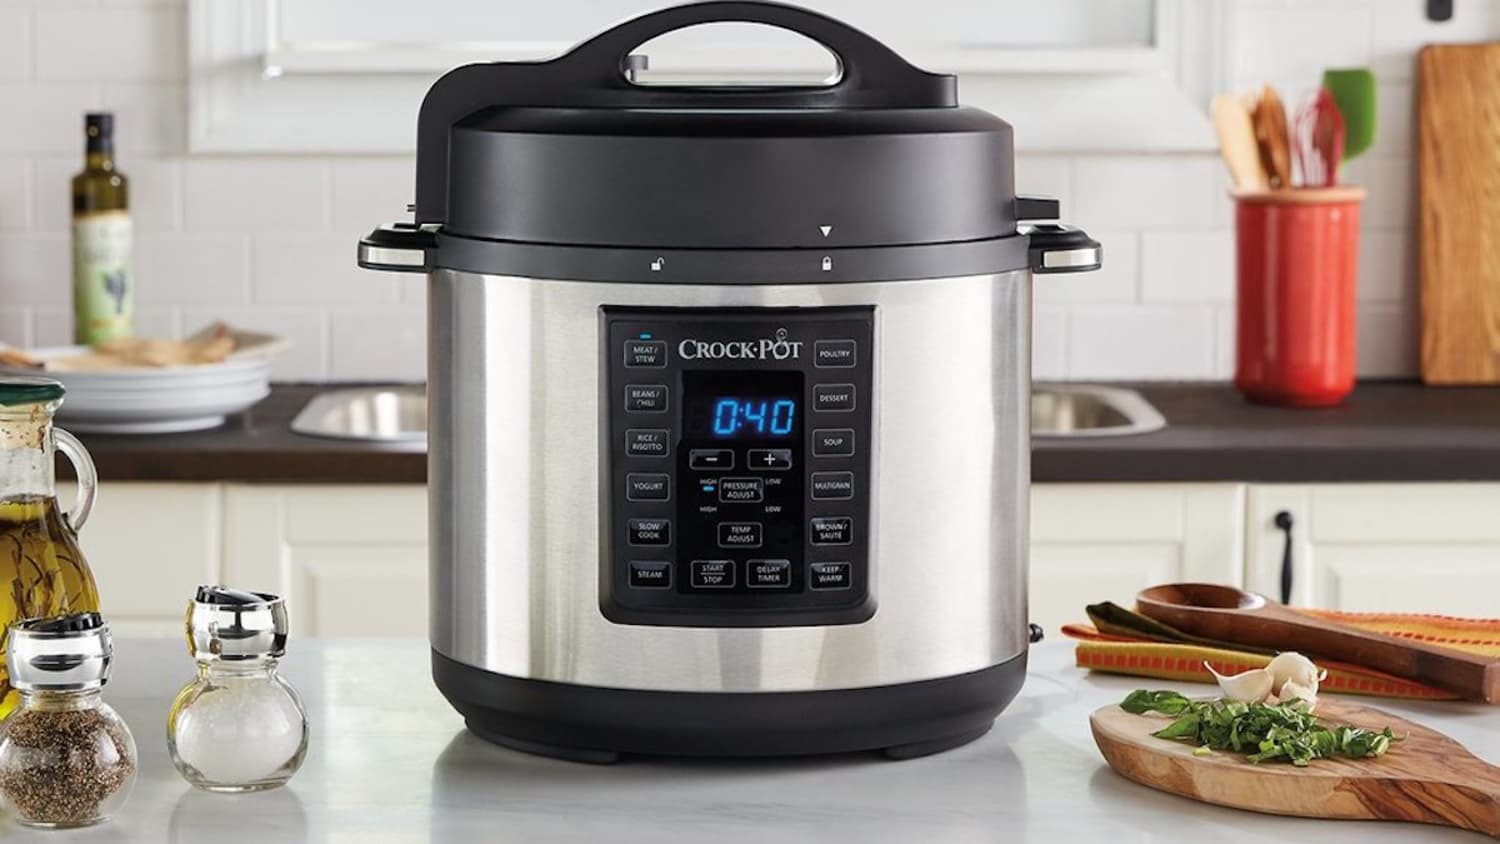 New Amazon Crock Pot Express - Pressure Cooker, The Kitchn